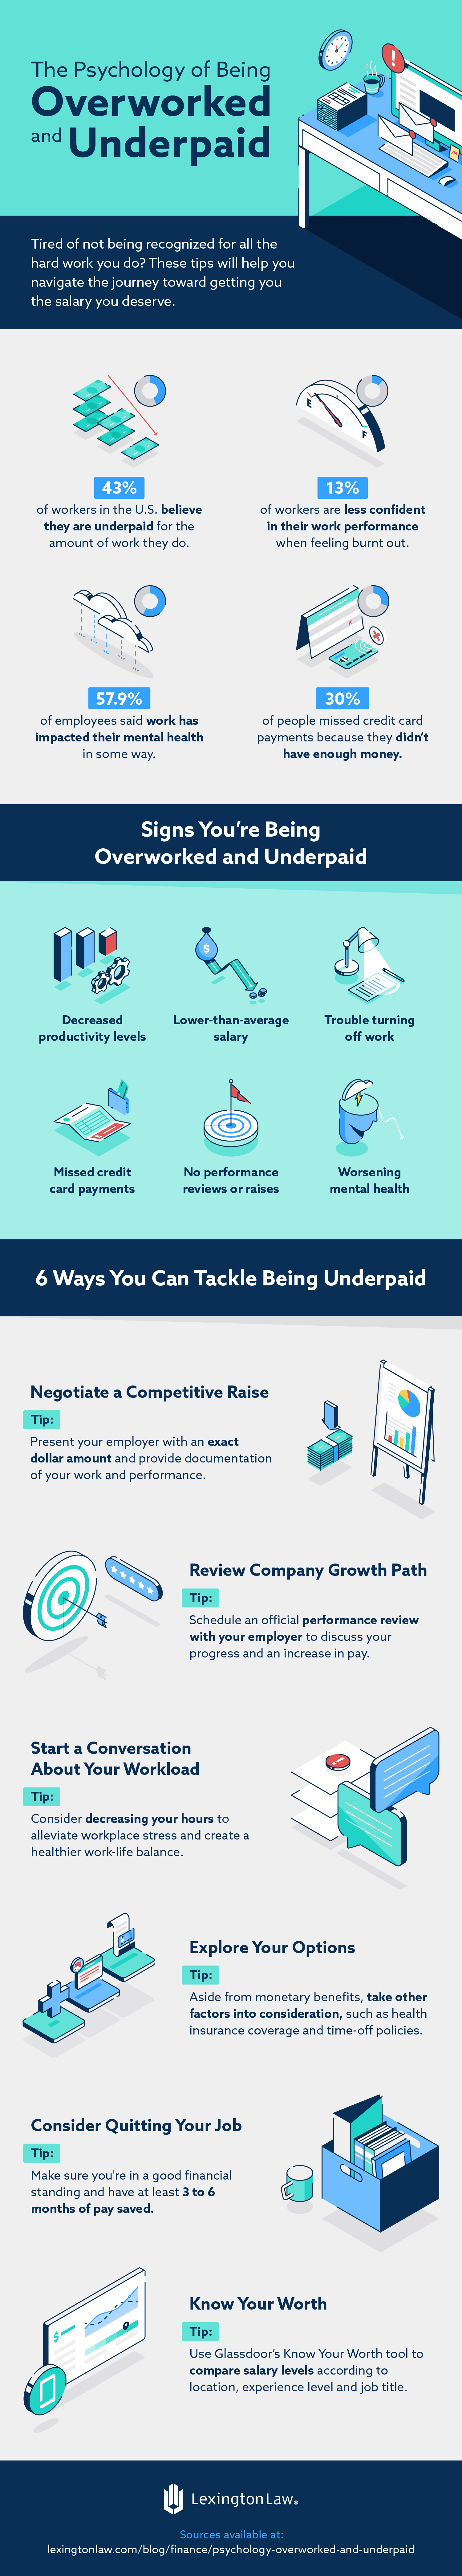 Infographic that illustrates the psychology of being overworked and underpaid 